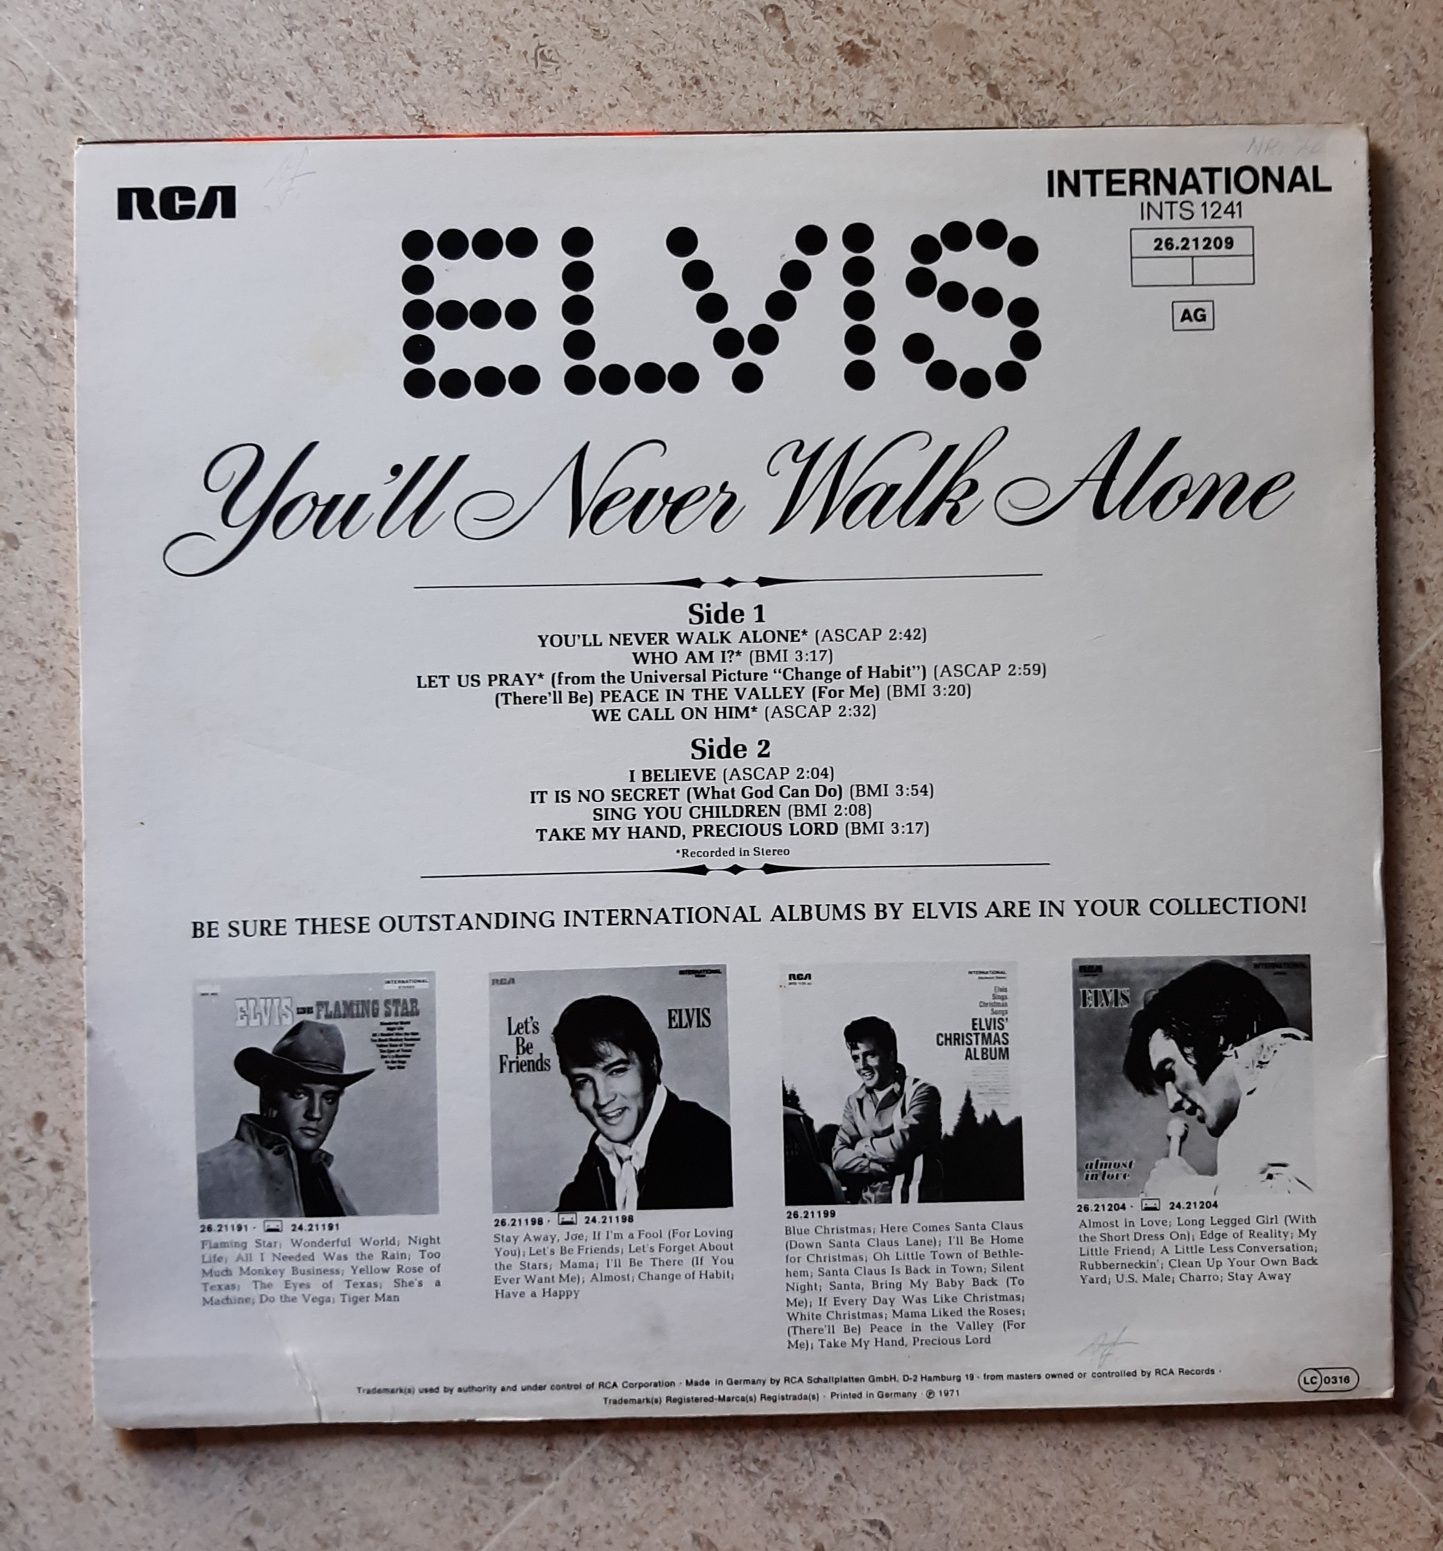 Elvis, "You'll Never Walk Alone"